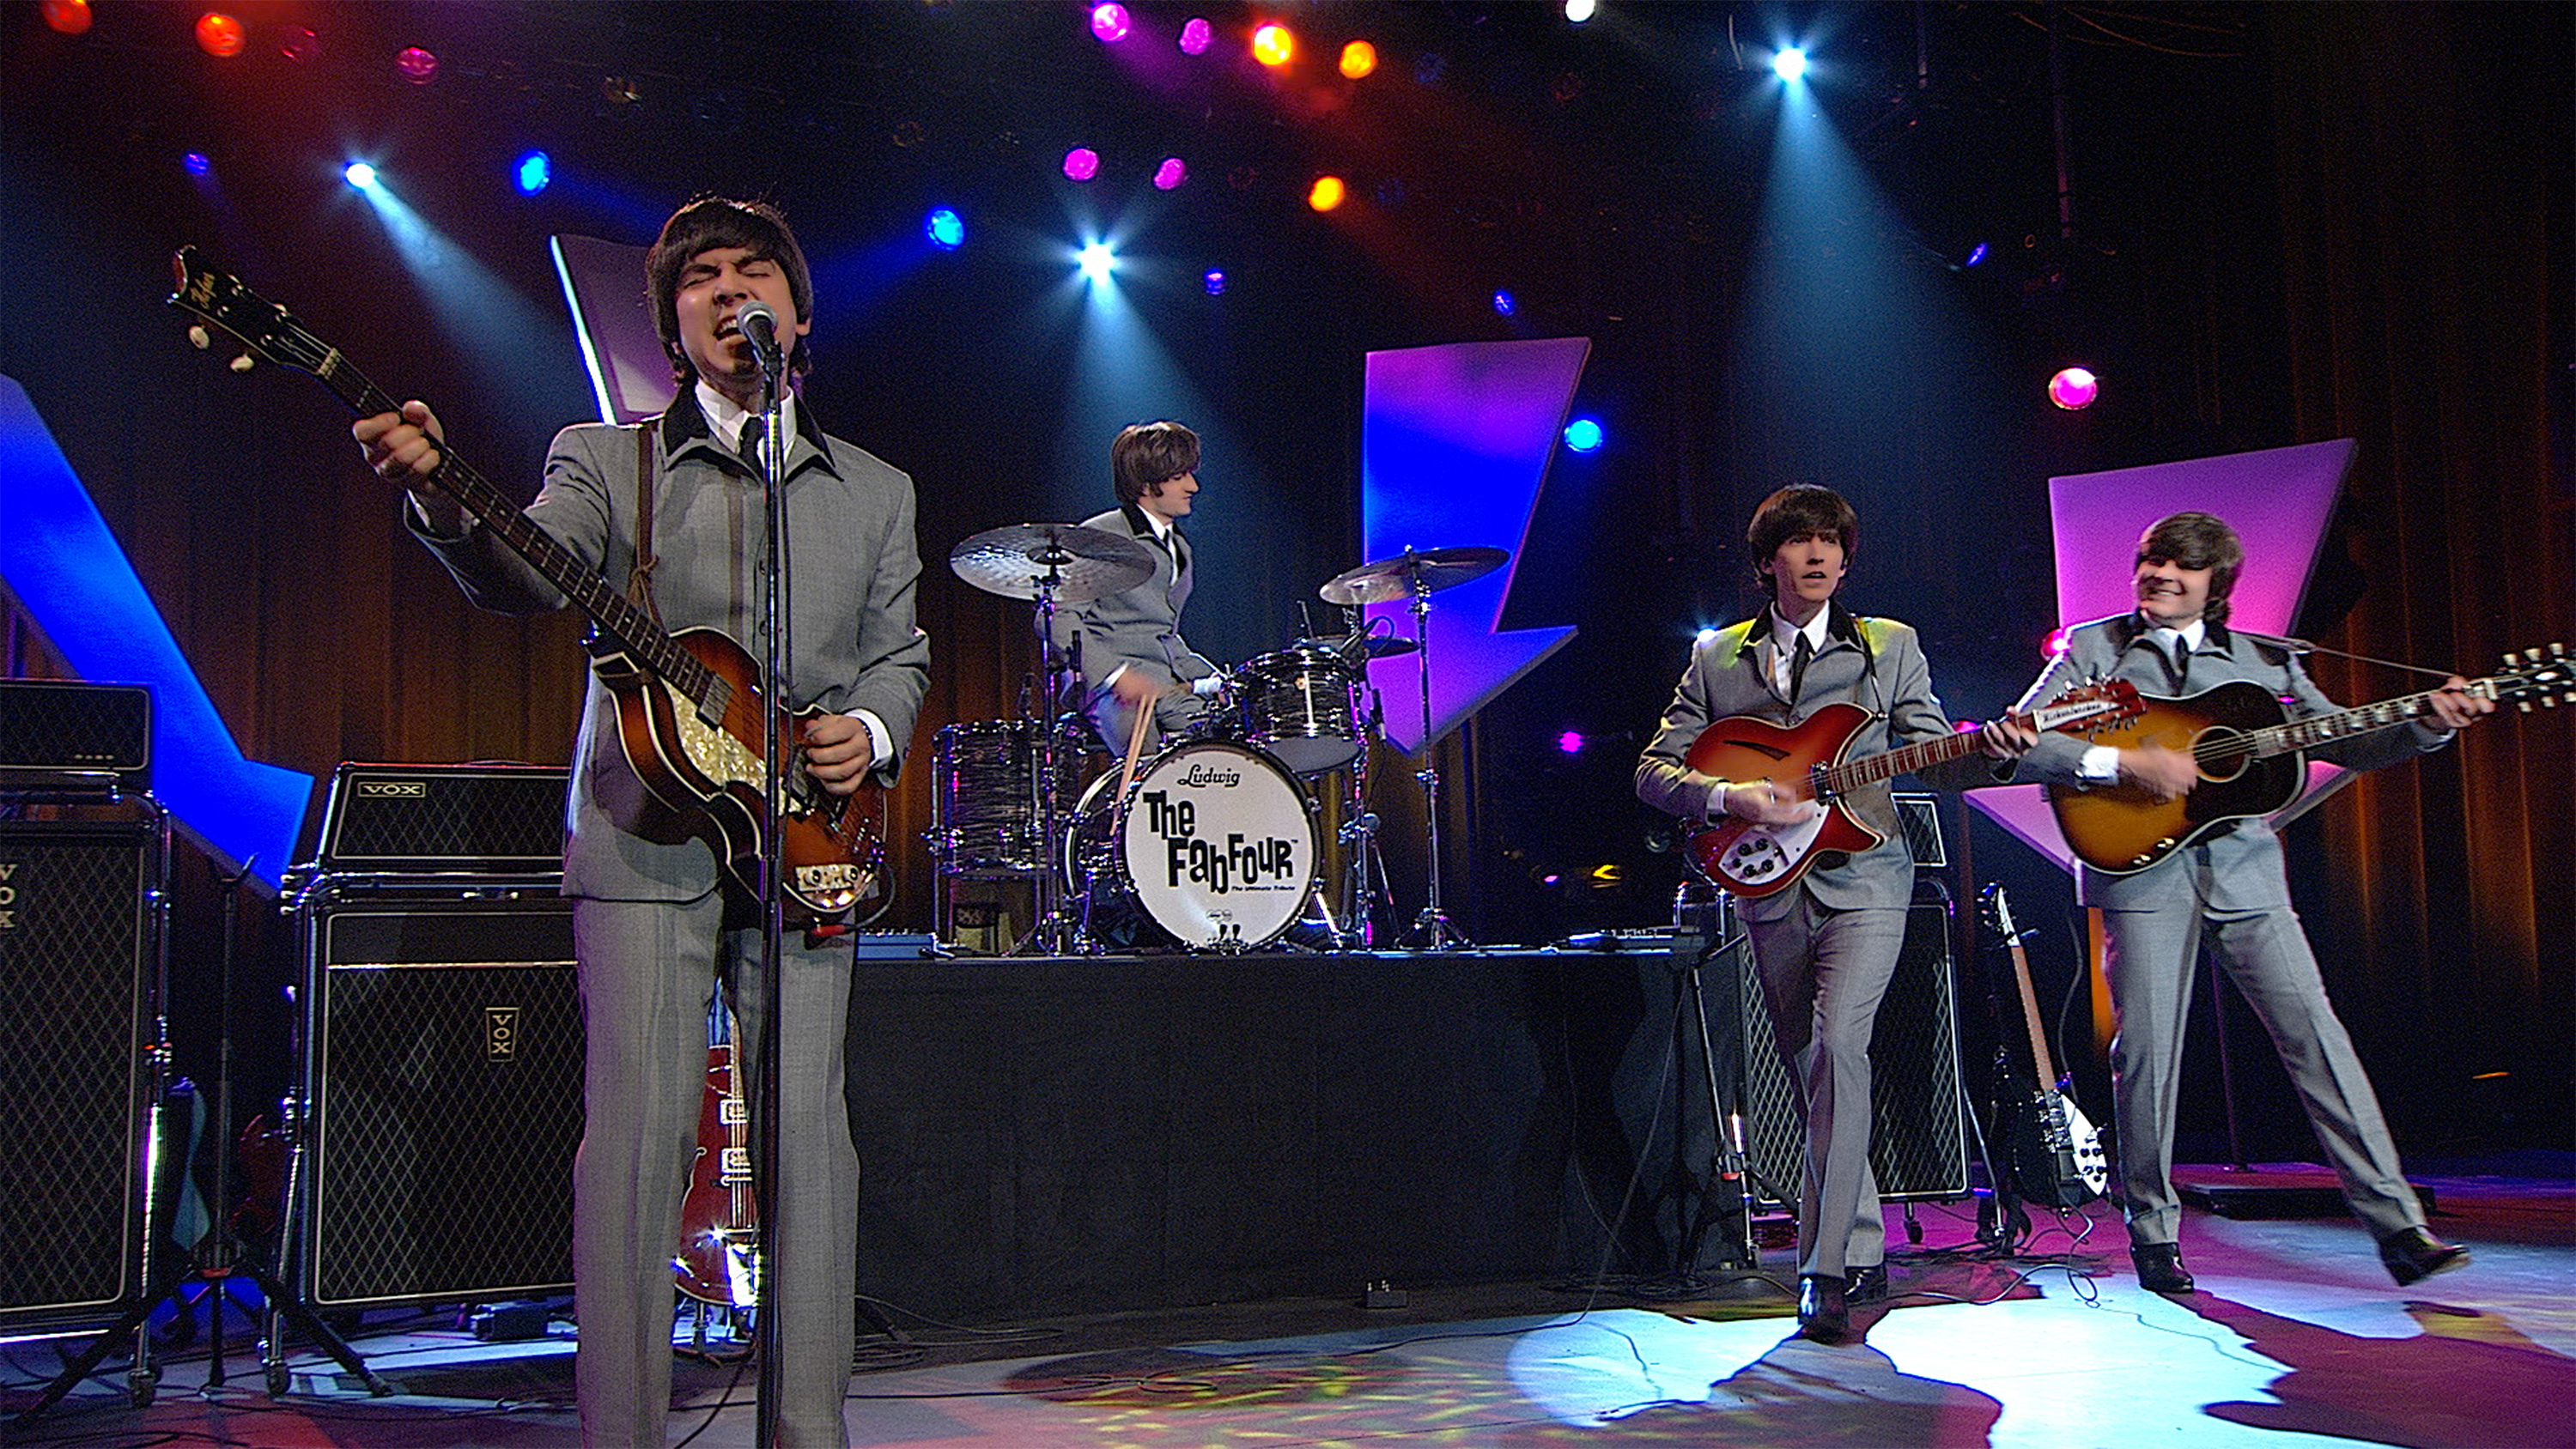 The Beatles Tribute Band: The Fab Four